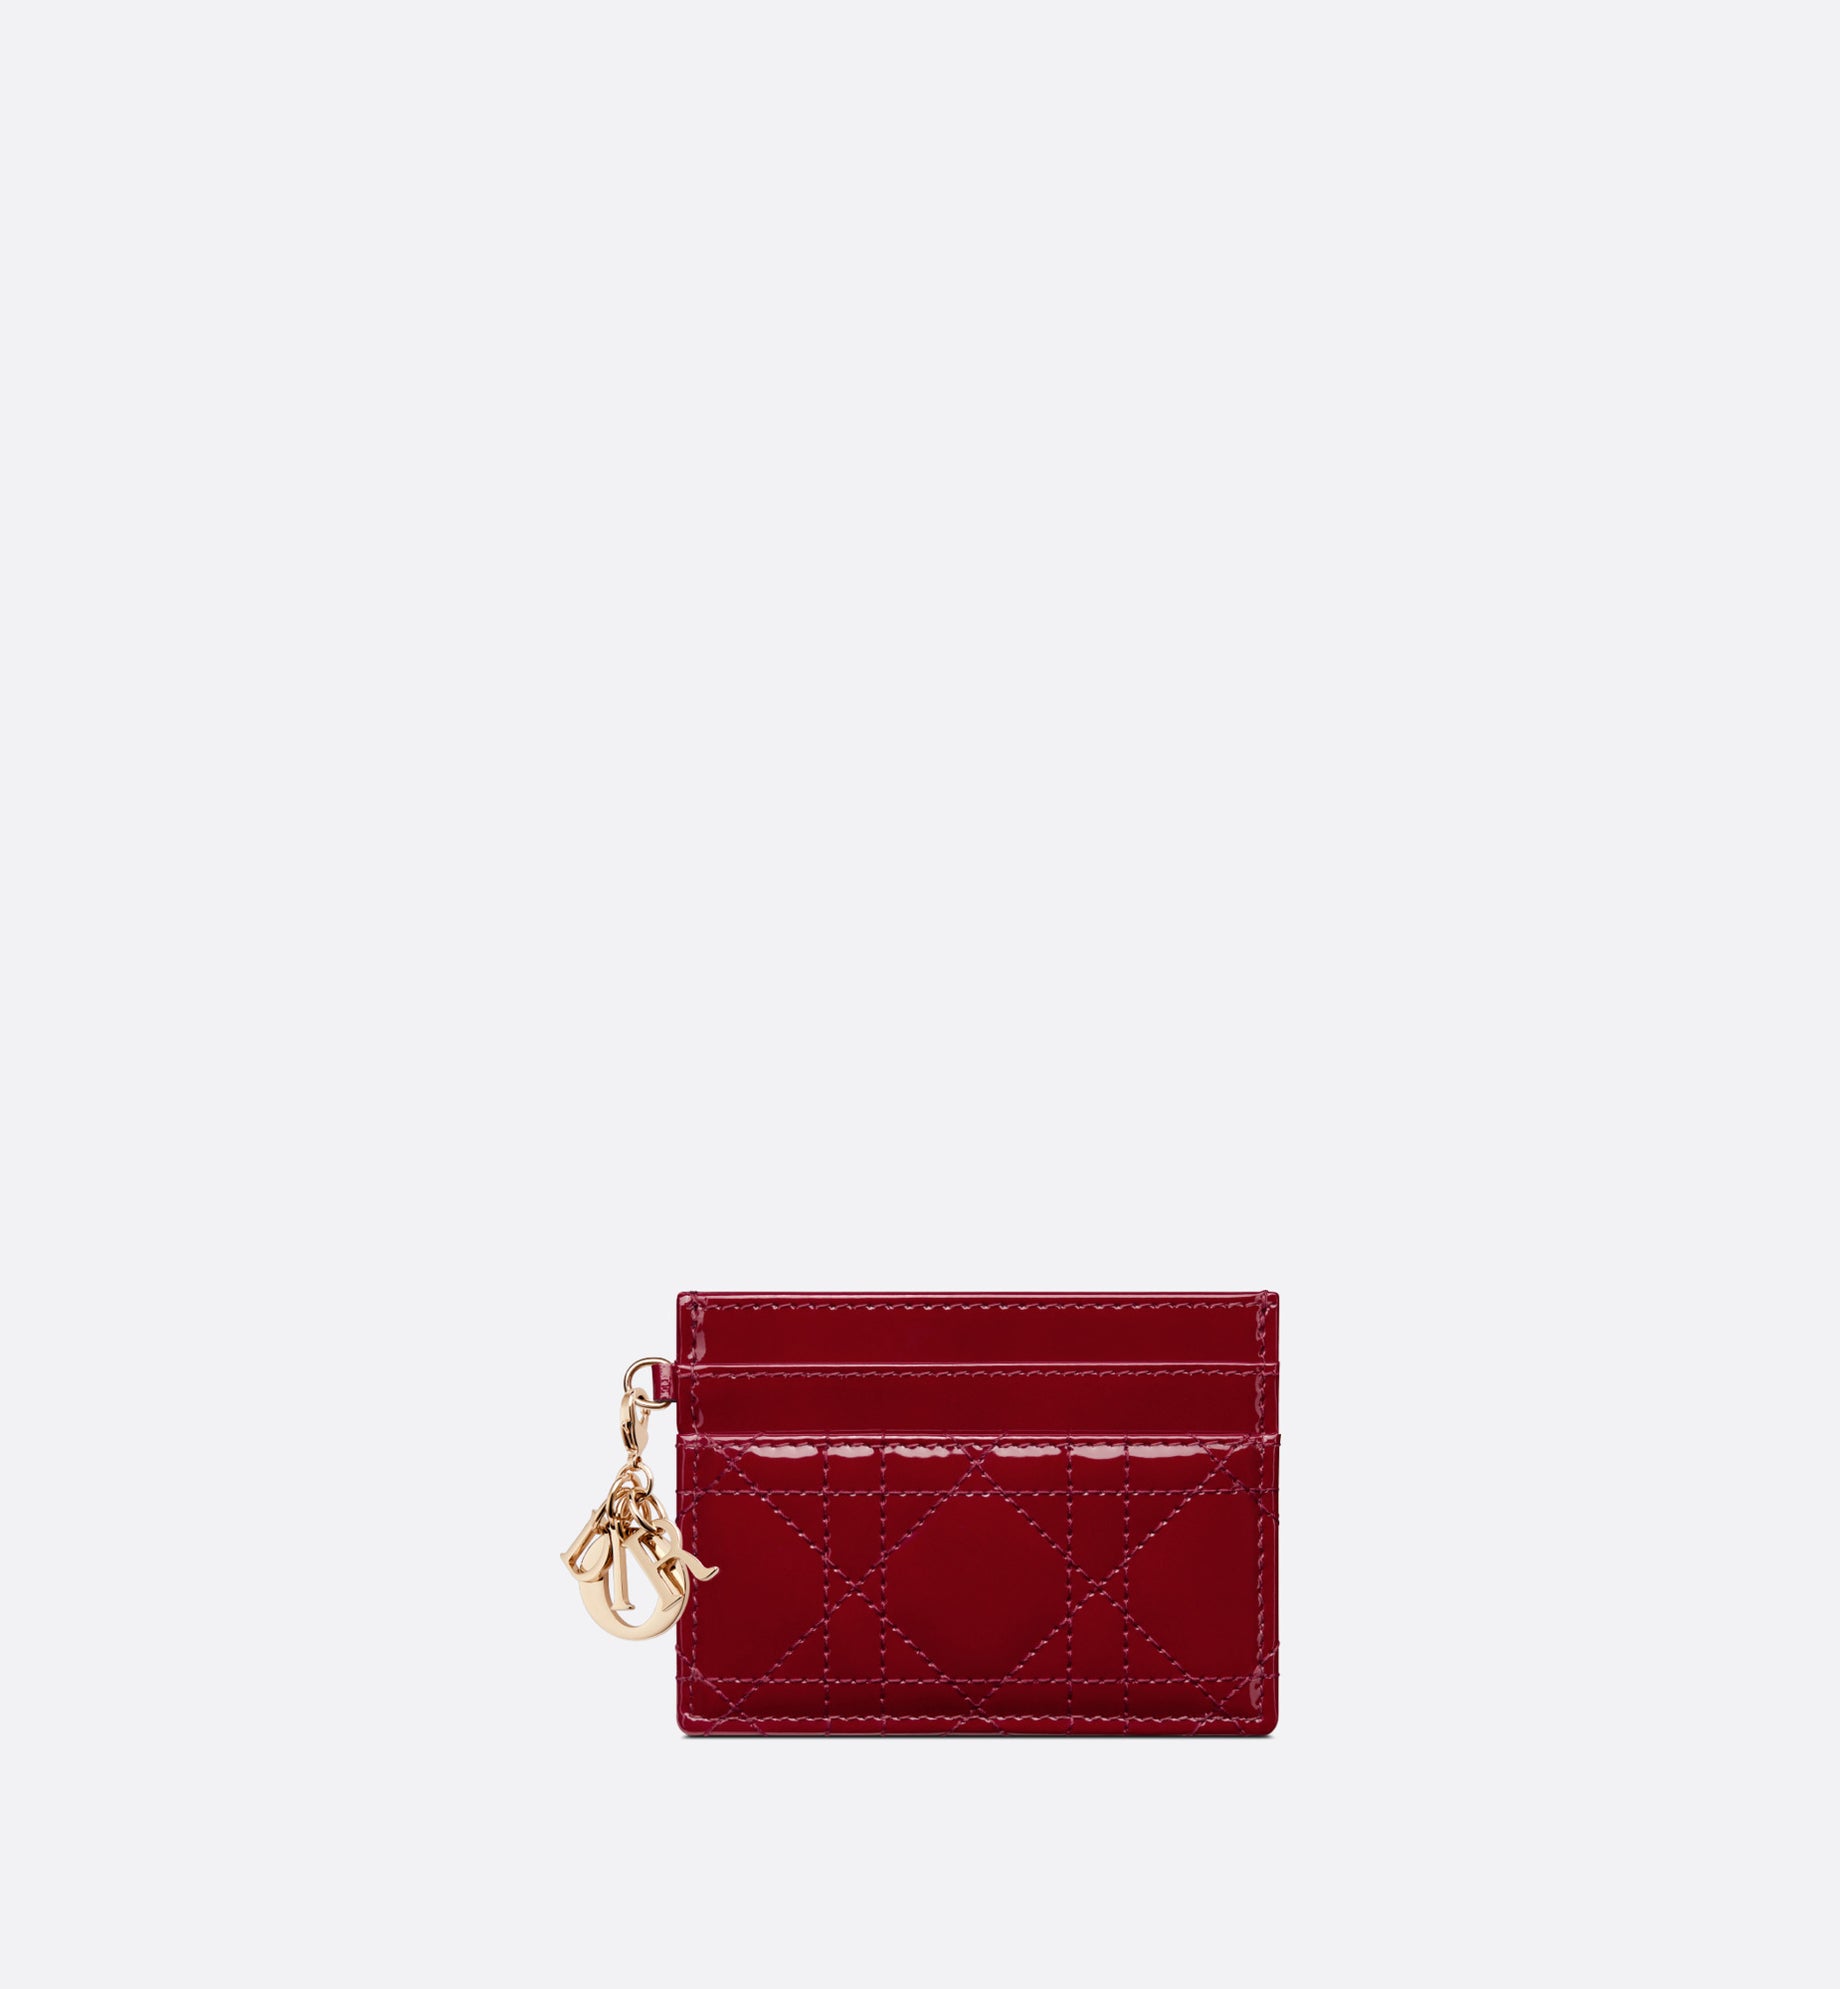 Lady Dior Five-Slot Card Holder • Cherry Red Patent Cannage Calfskin